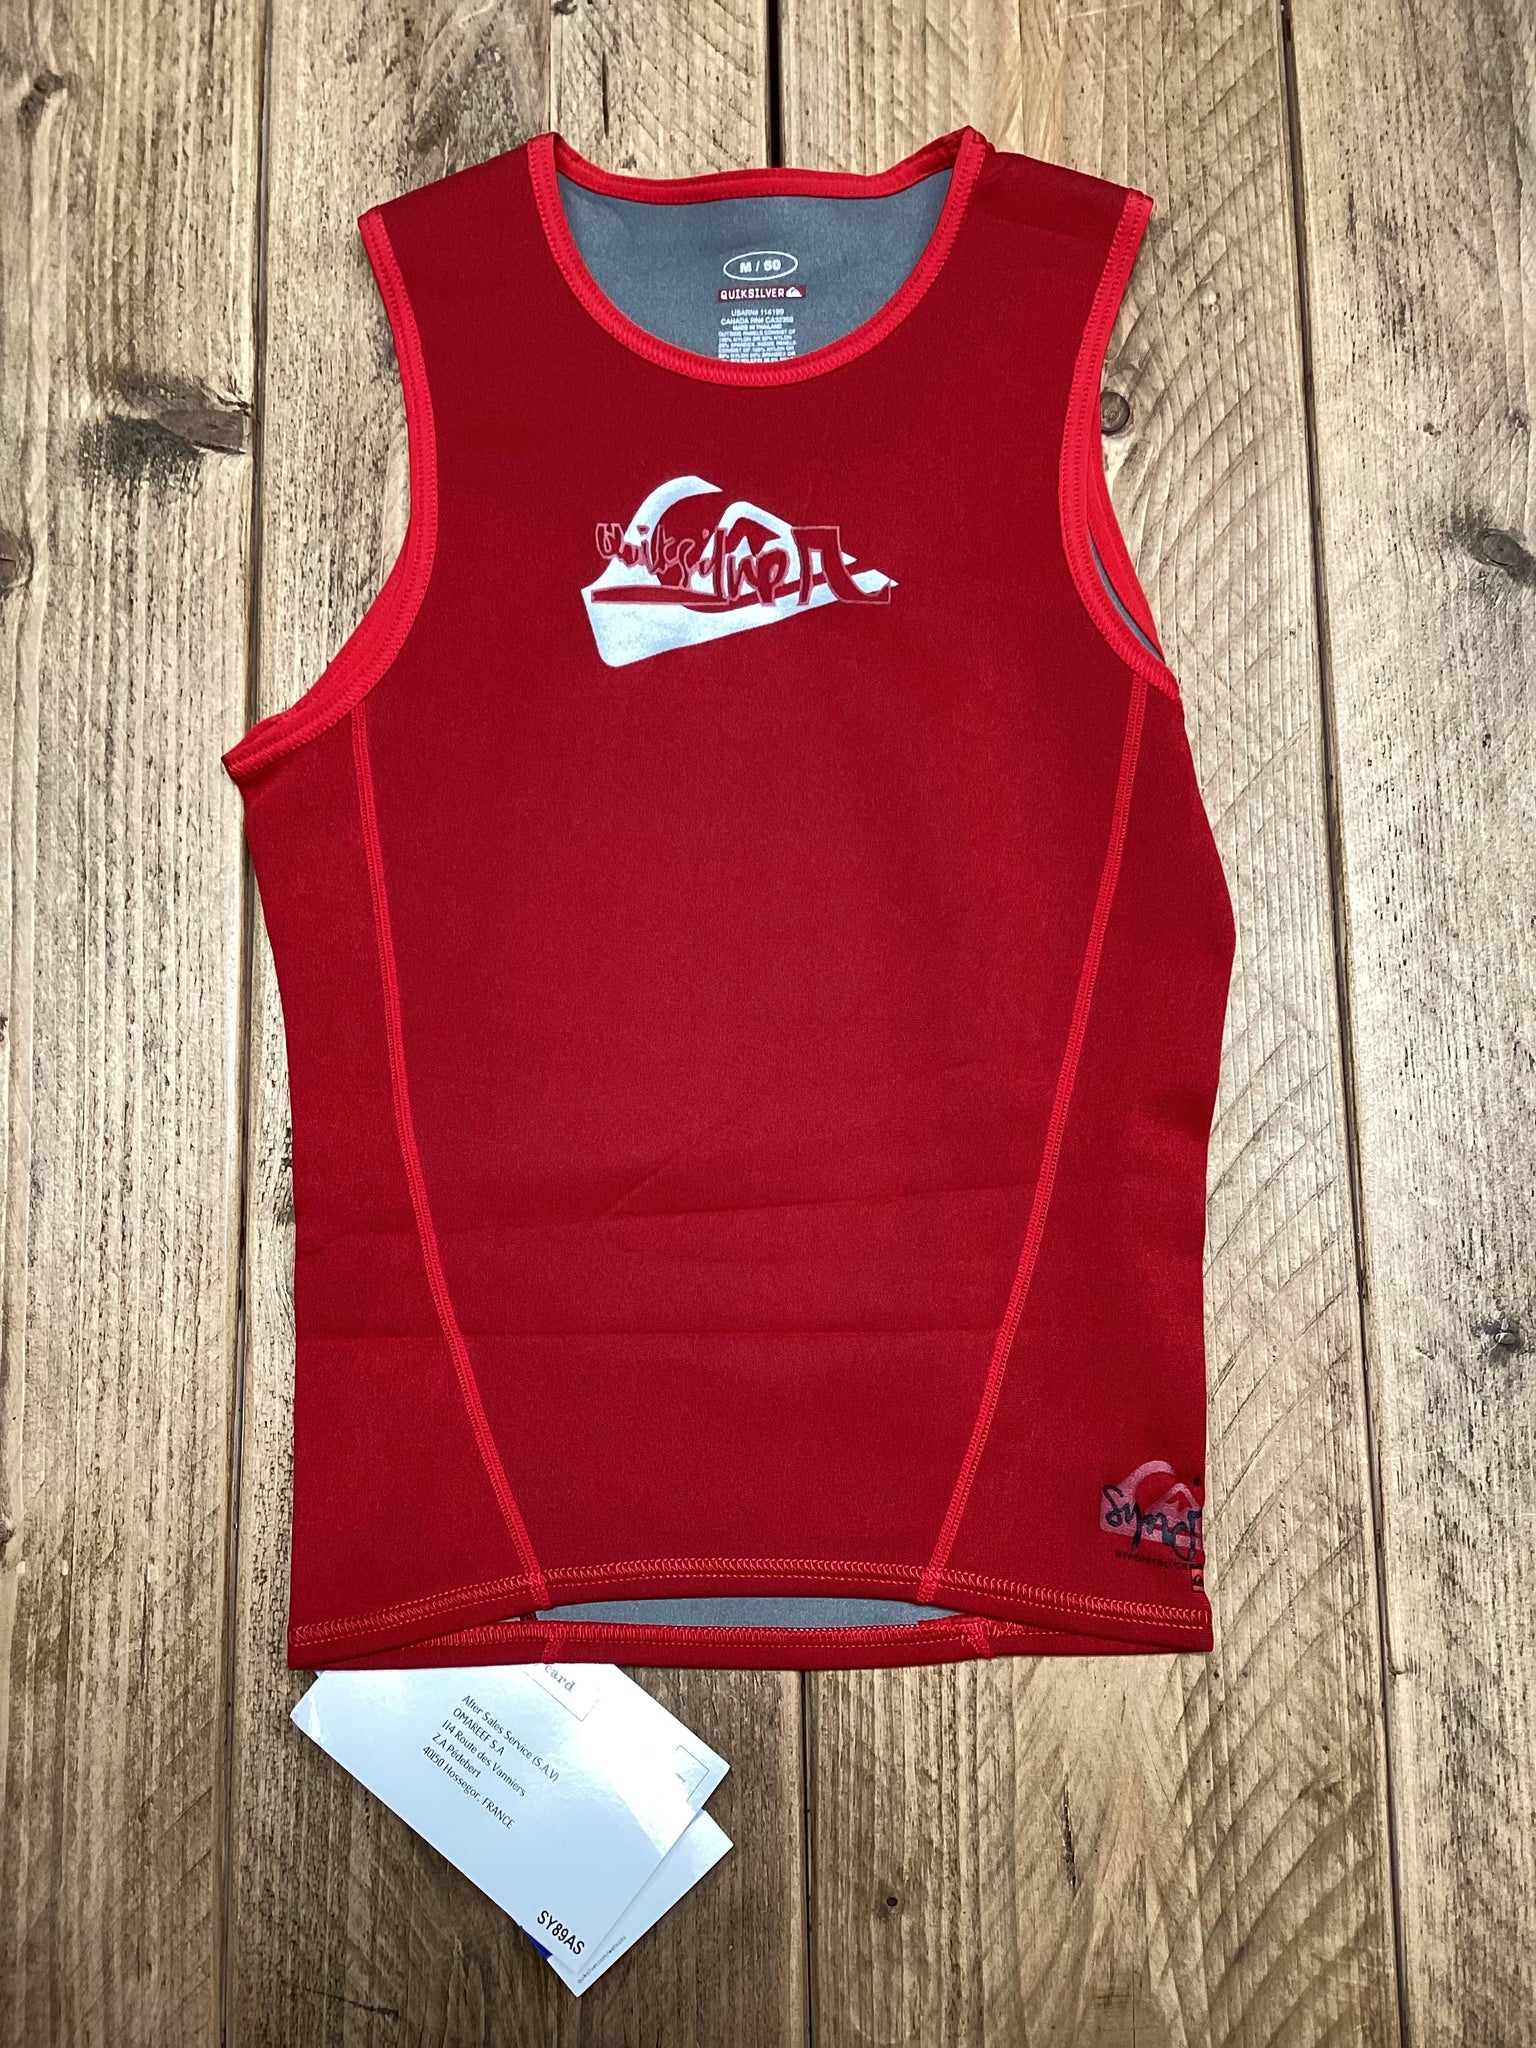 Quiksilver 0.5M Hyperstretch Sleeveless Wetsuit Vest Blood Red Size Medium SY89AS